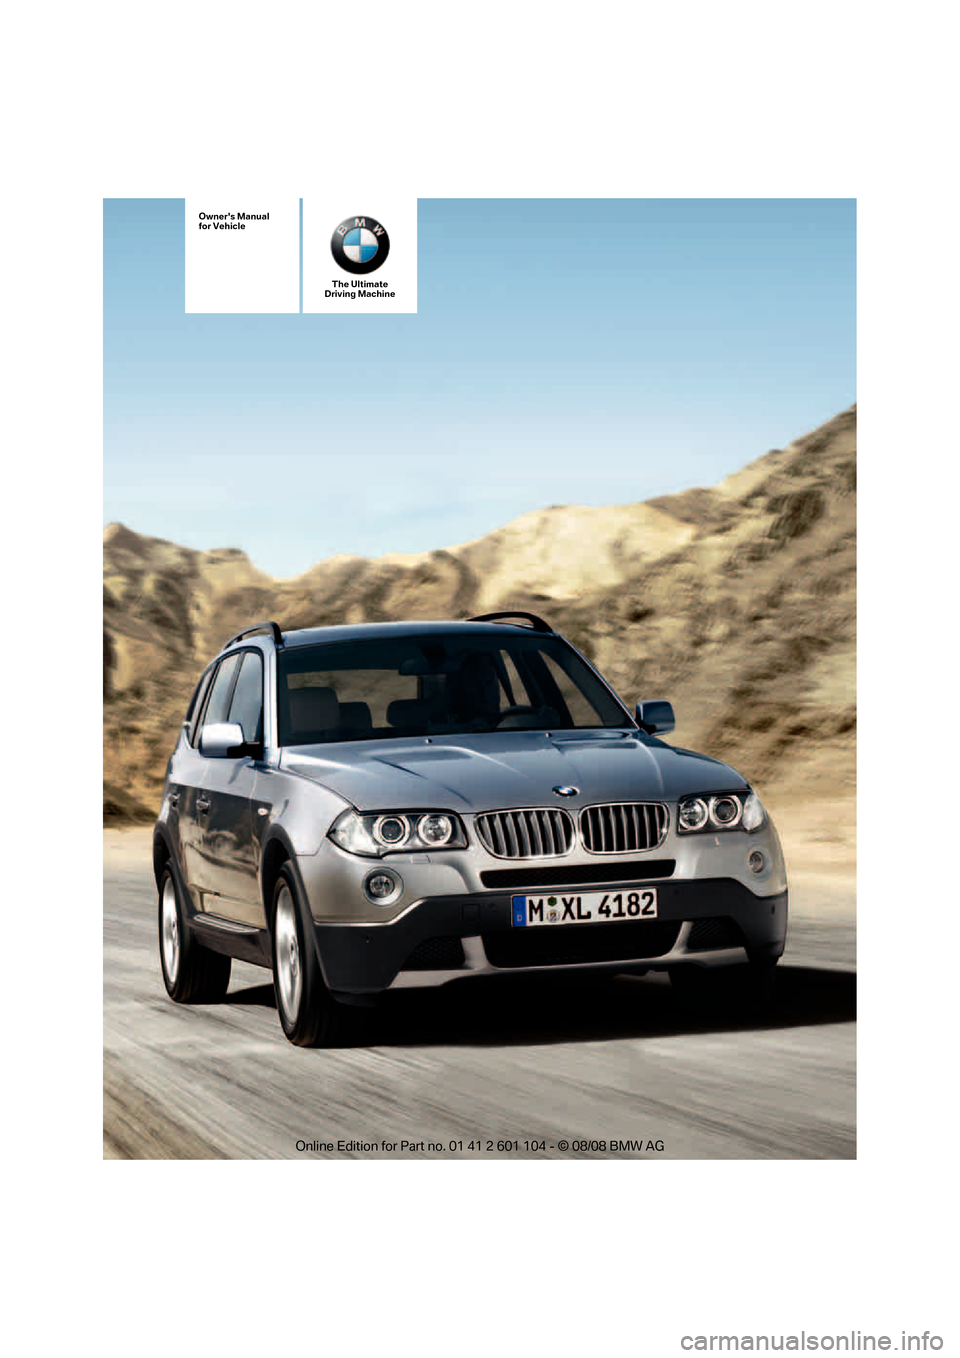 BMW X3 XDRIVE 30I 2009 E83 Owners Manual The Ultimate
Driving Machine
Owners Manual
for Vehicle 